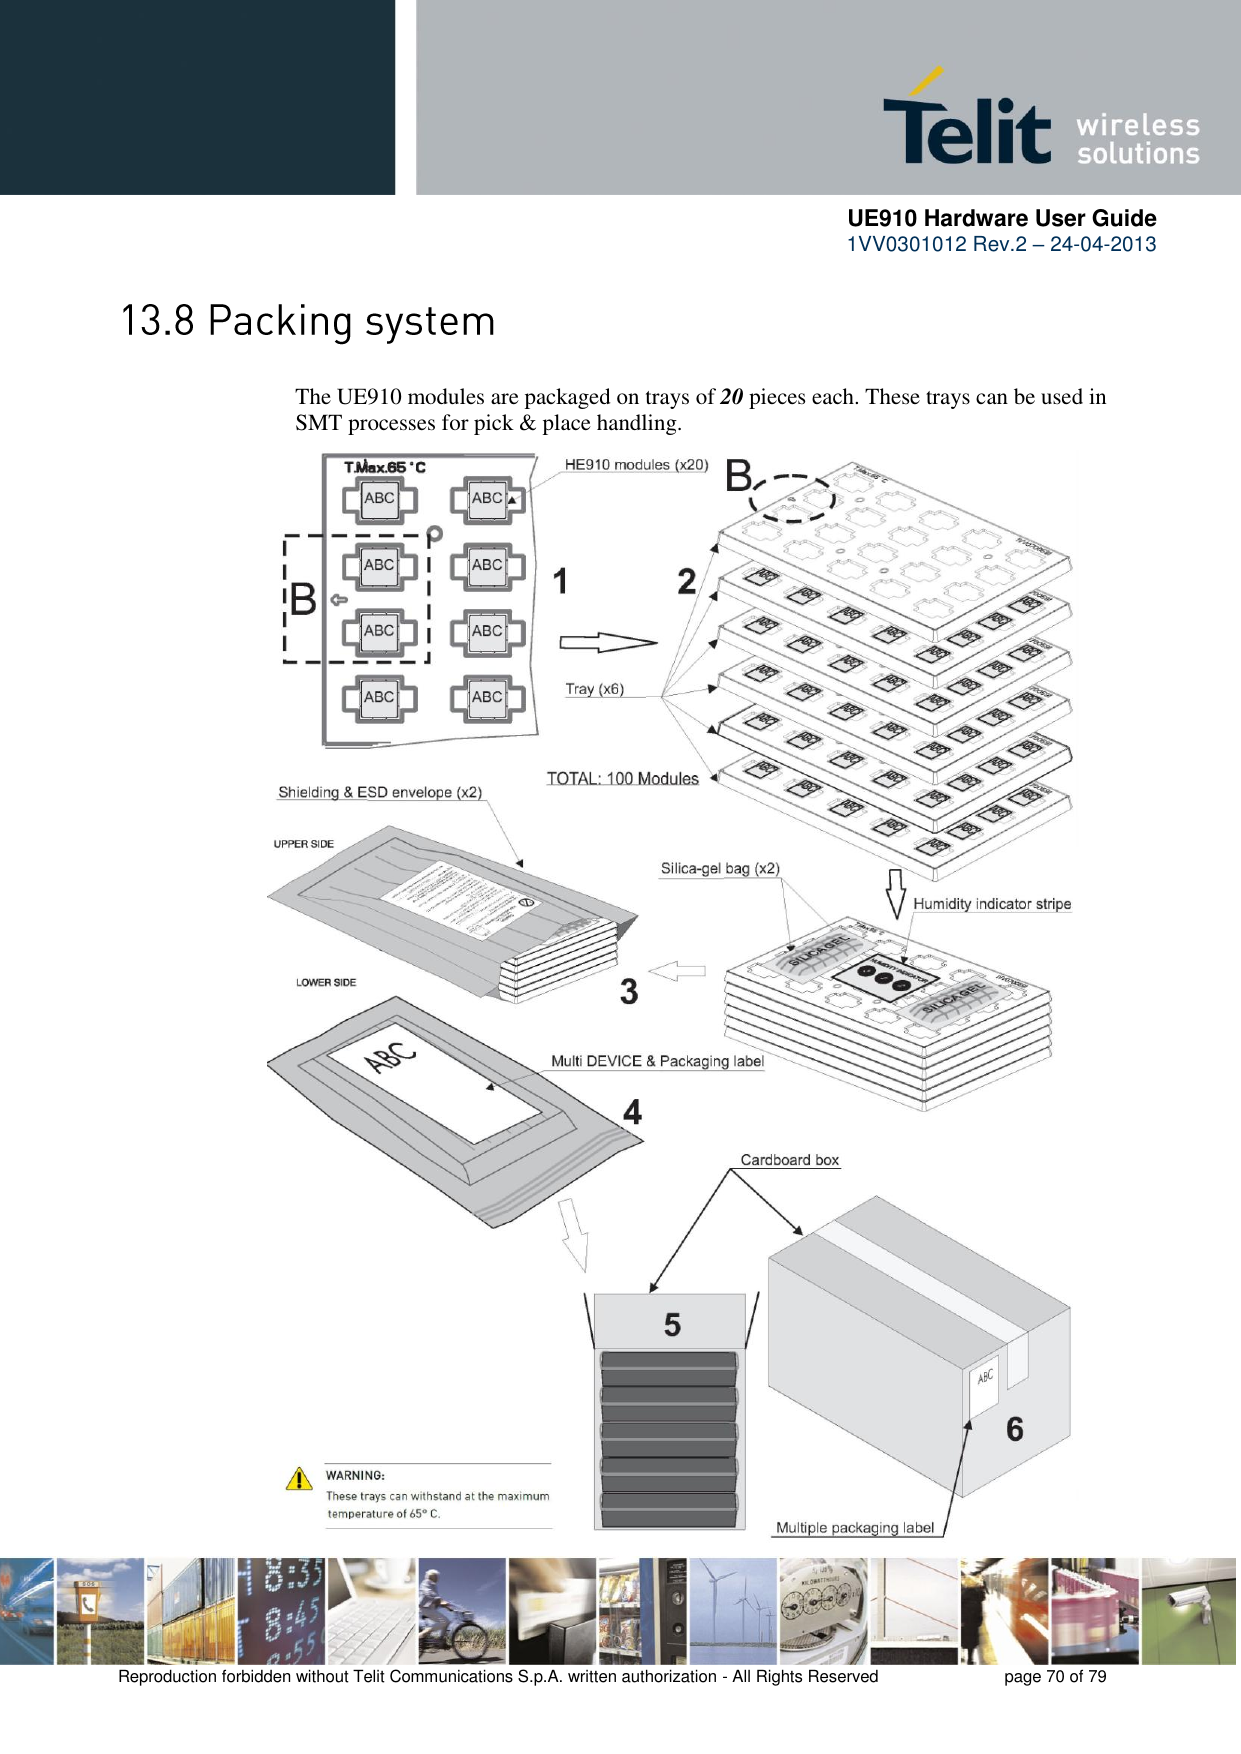      UE910 Hardware User Guide  1VV0301012 Rev.2 – 24-04-2013    Reproduction forbidden without Telit Communications S.p.A. written authorization - All Rights Reserved    page 70 of 79   The UE910 modules are packaged on trays of 20 pieces each. These trays can be used in SMT processes for pick &amp; place handling.                                           